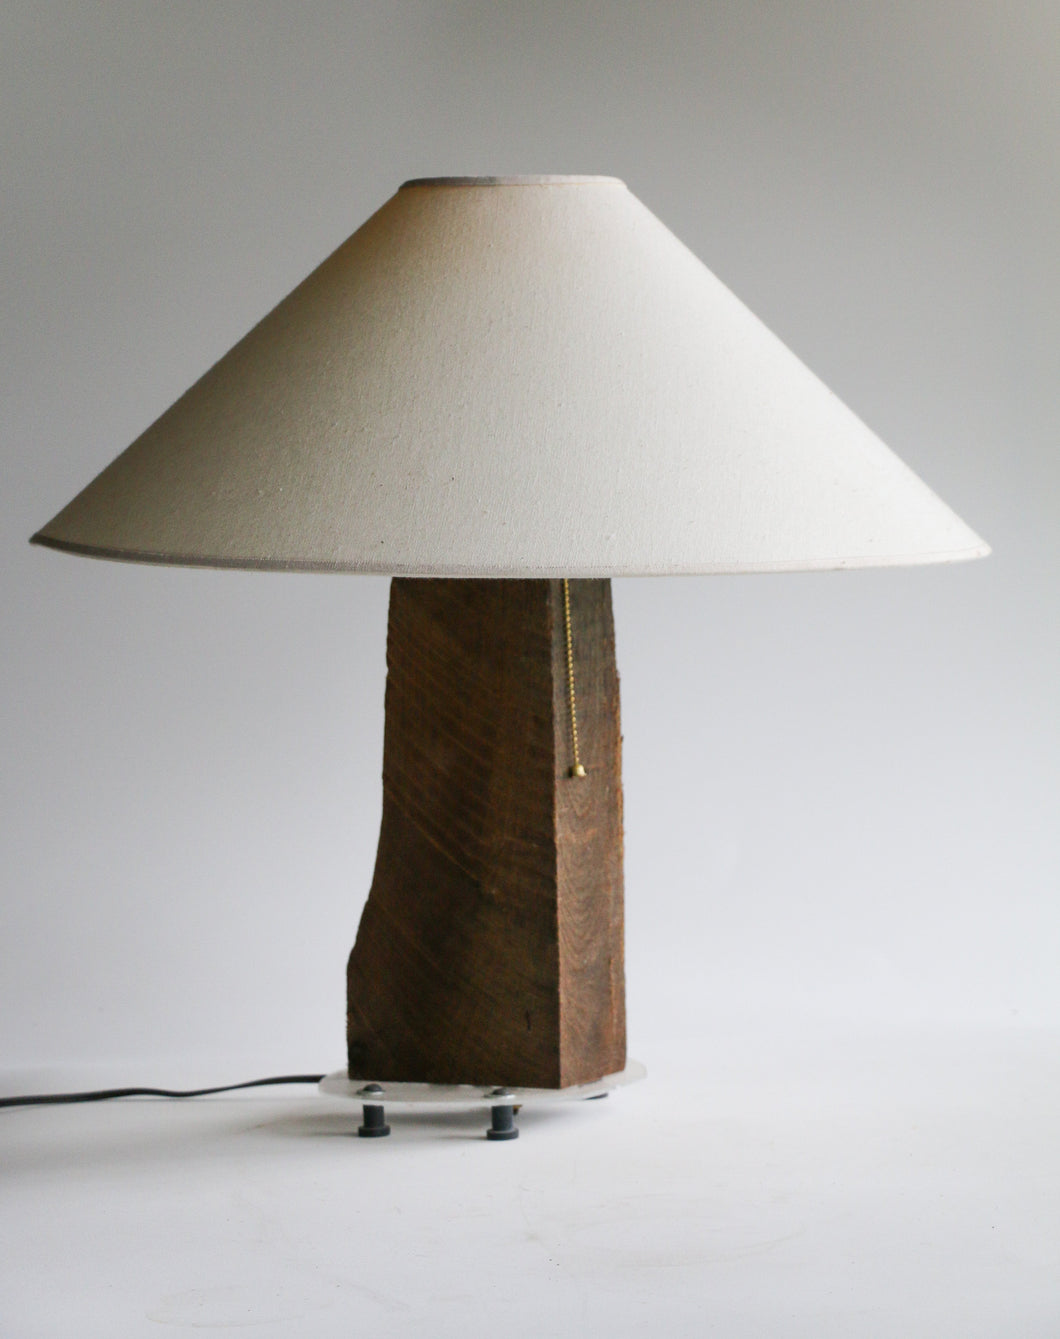 Handmade Live Edge Wooden Table Lamp by Lee Mumford